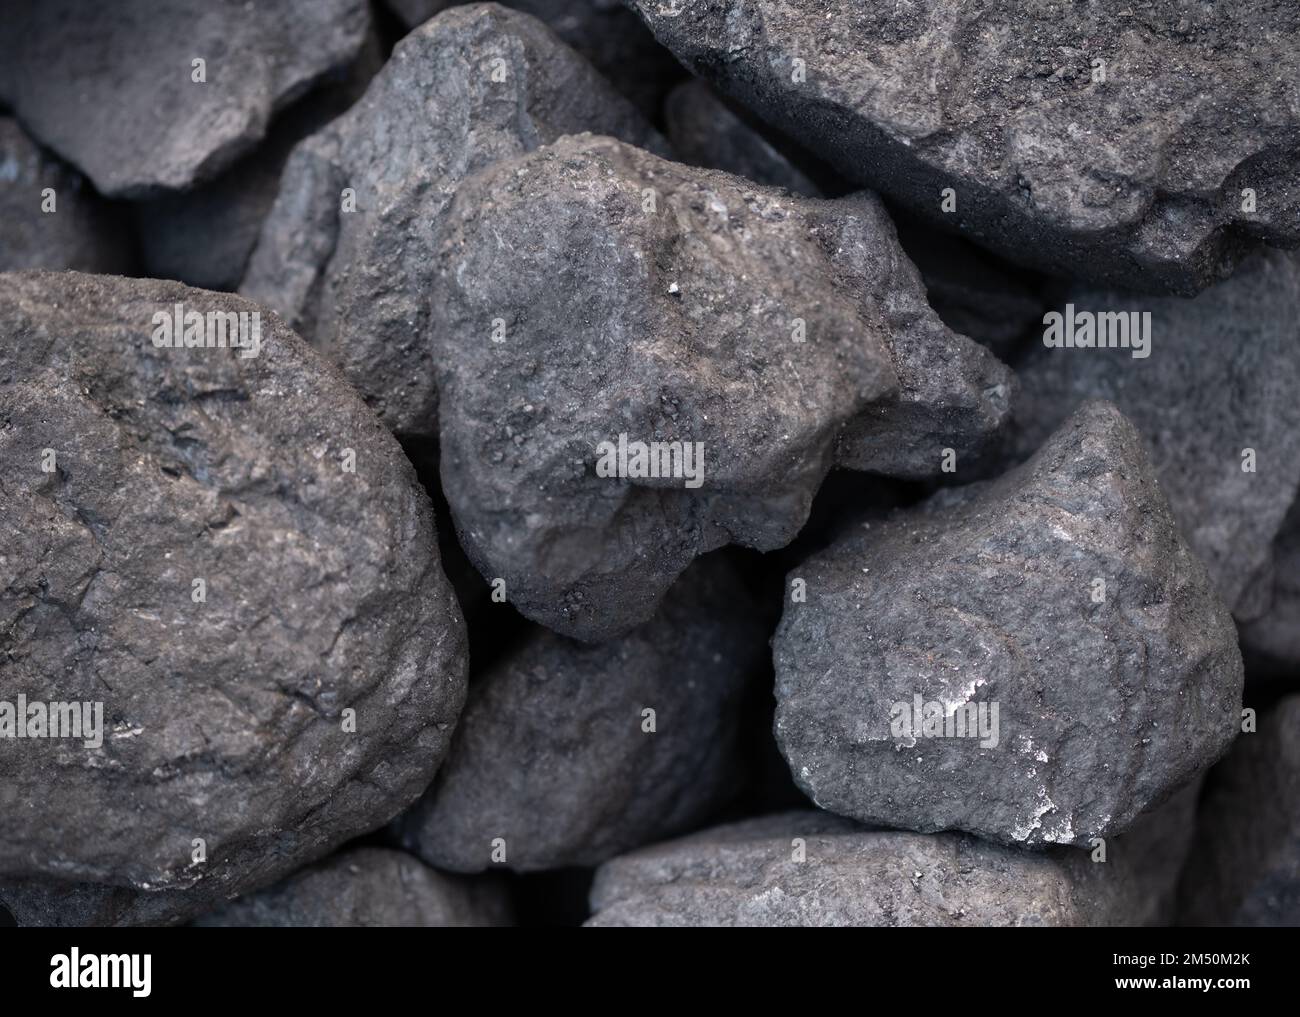 Abstract Background Texture Of Coal, An Irresponsible Fossil Fuel Stock Photo